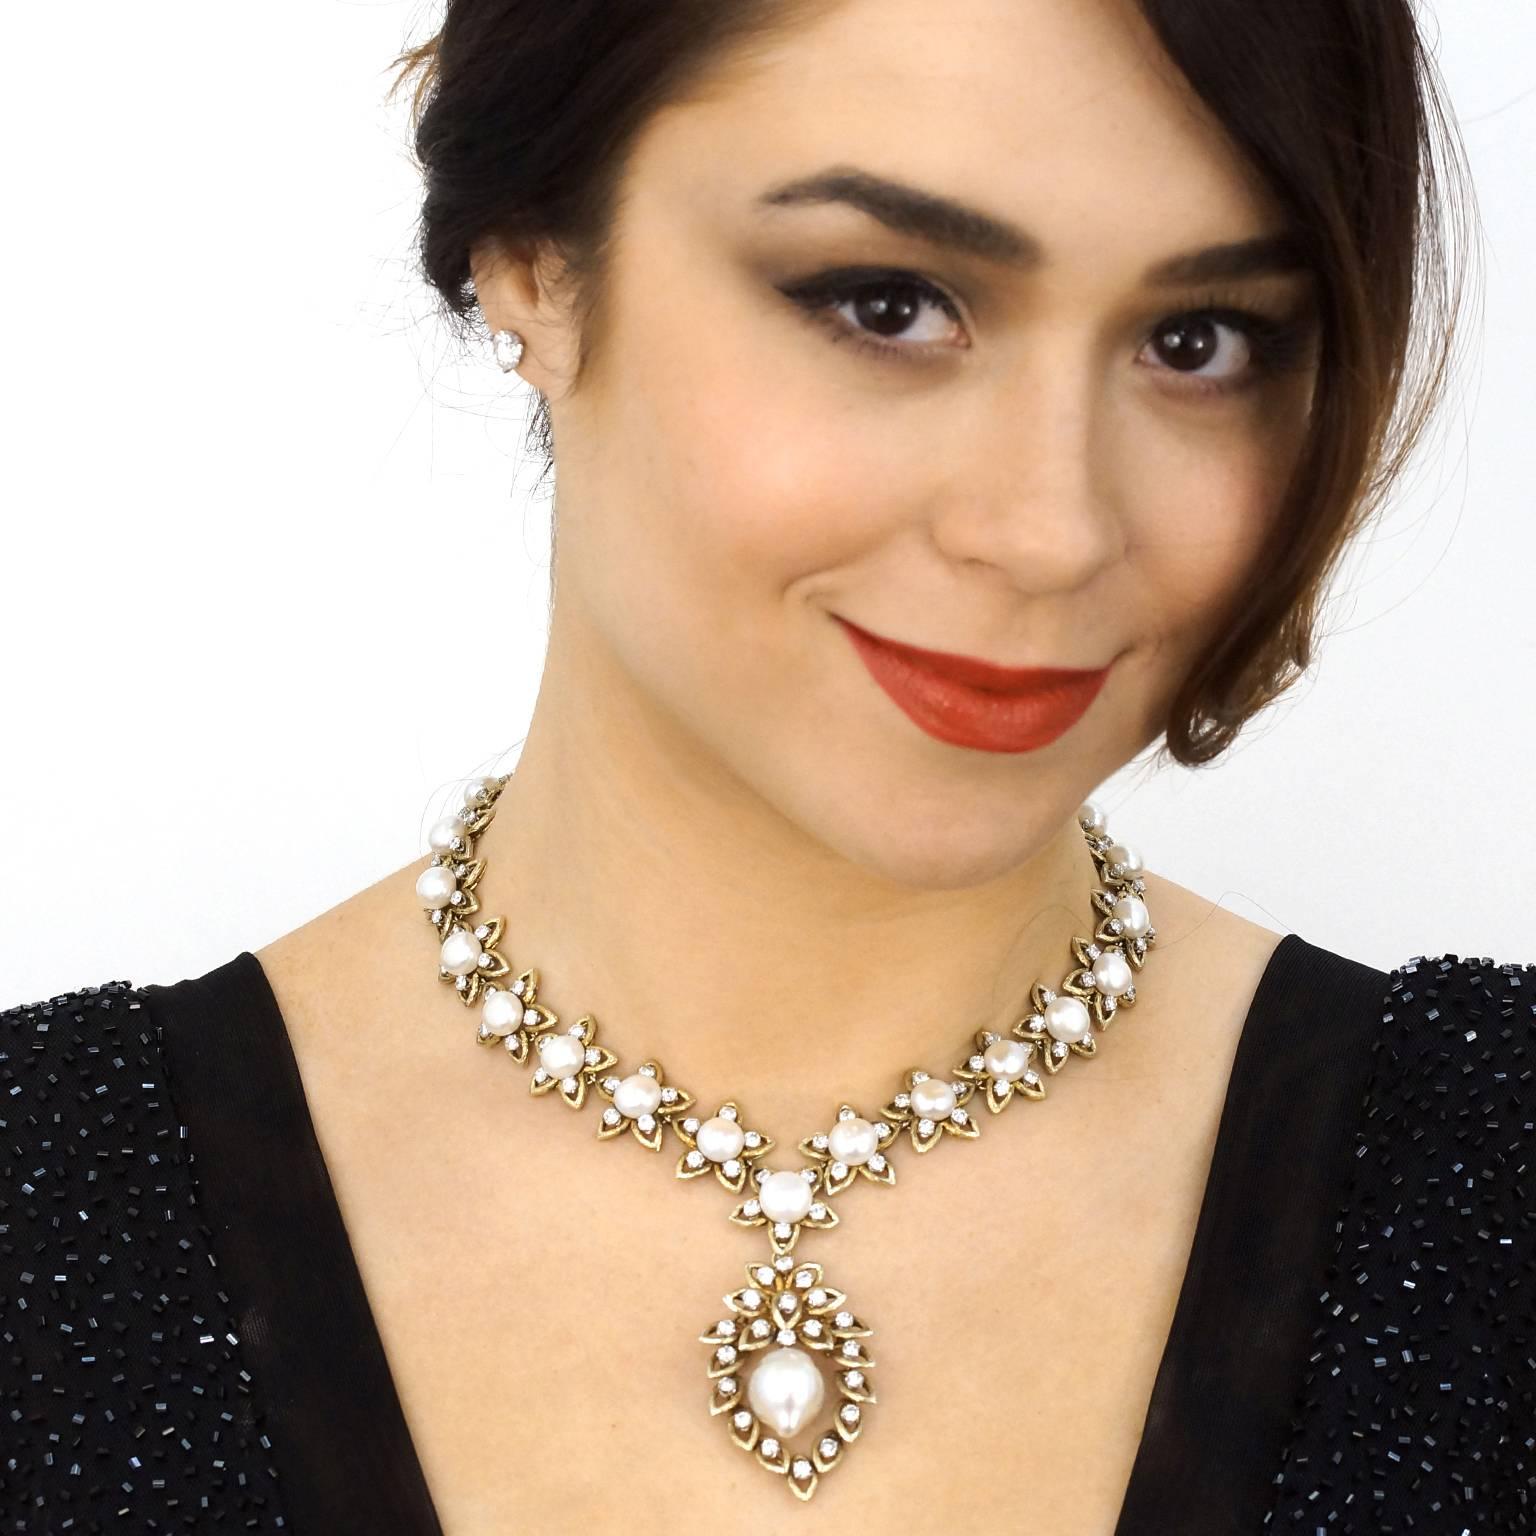 Circa 1960s, 14k, German. This glamorous necklace is set with 18 carats of brilliant white diamonds and a stunning collection of beautifully matched natural cultured pearls. A detachable drop, festooned with a huge pearl, gives the piece visual